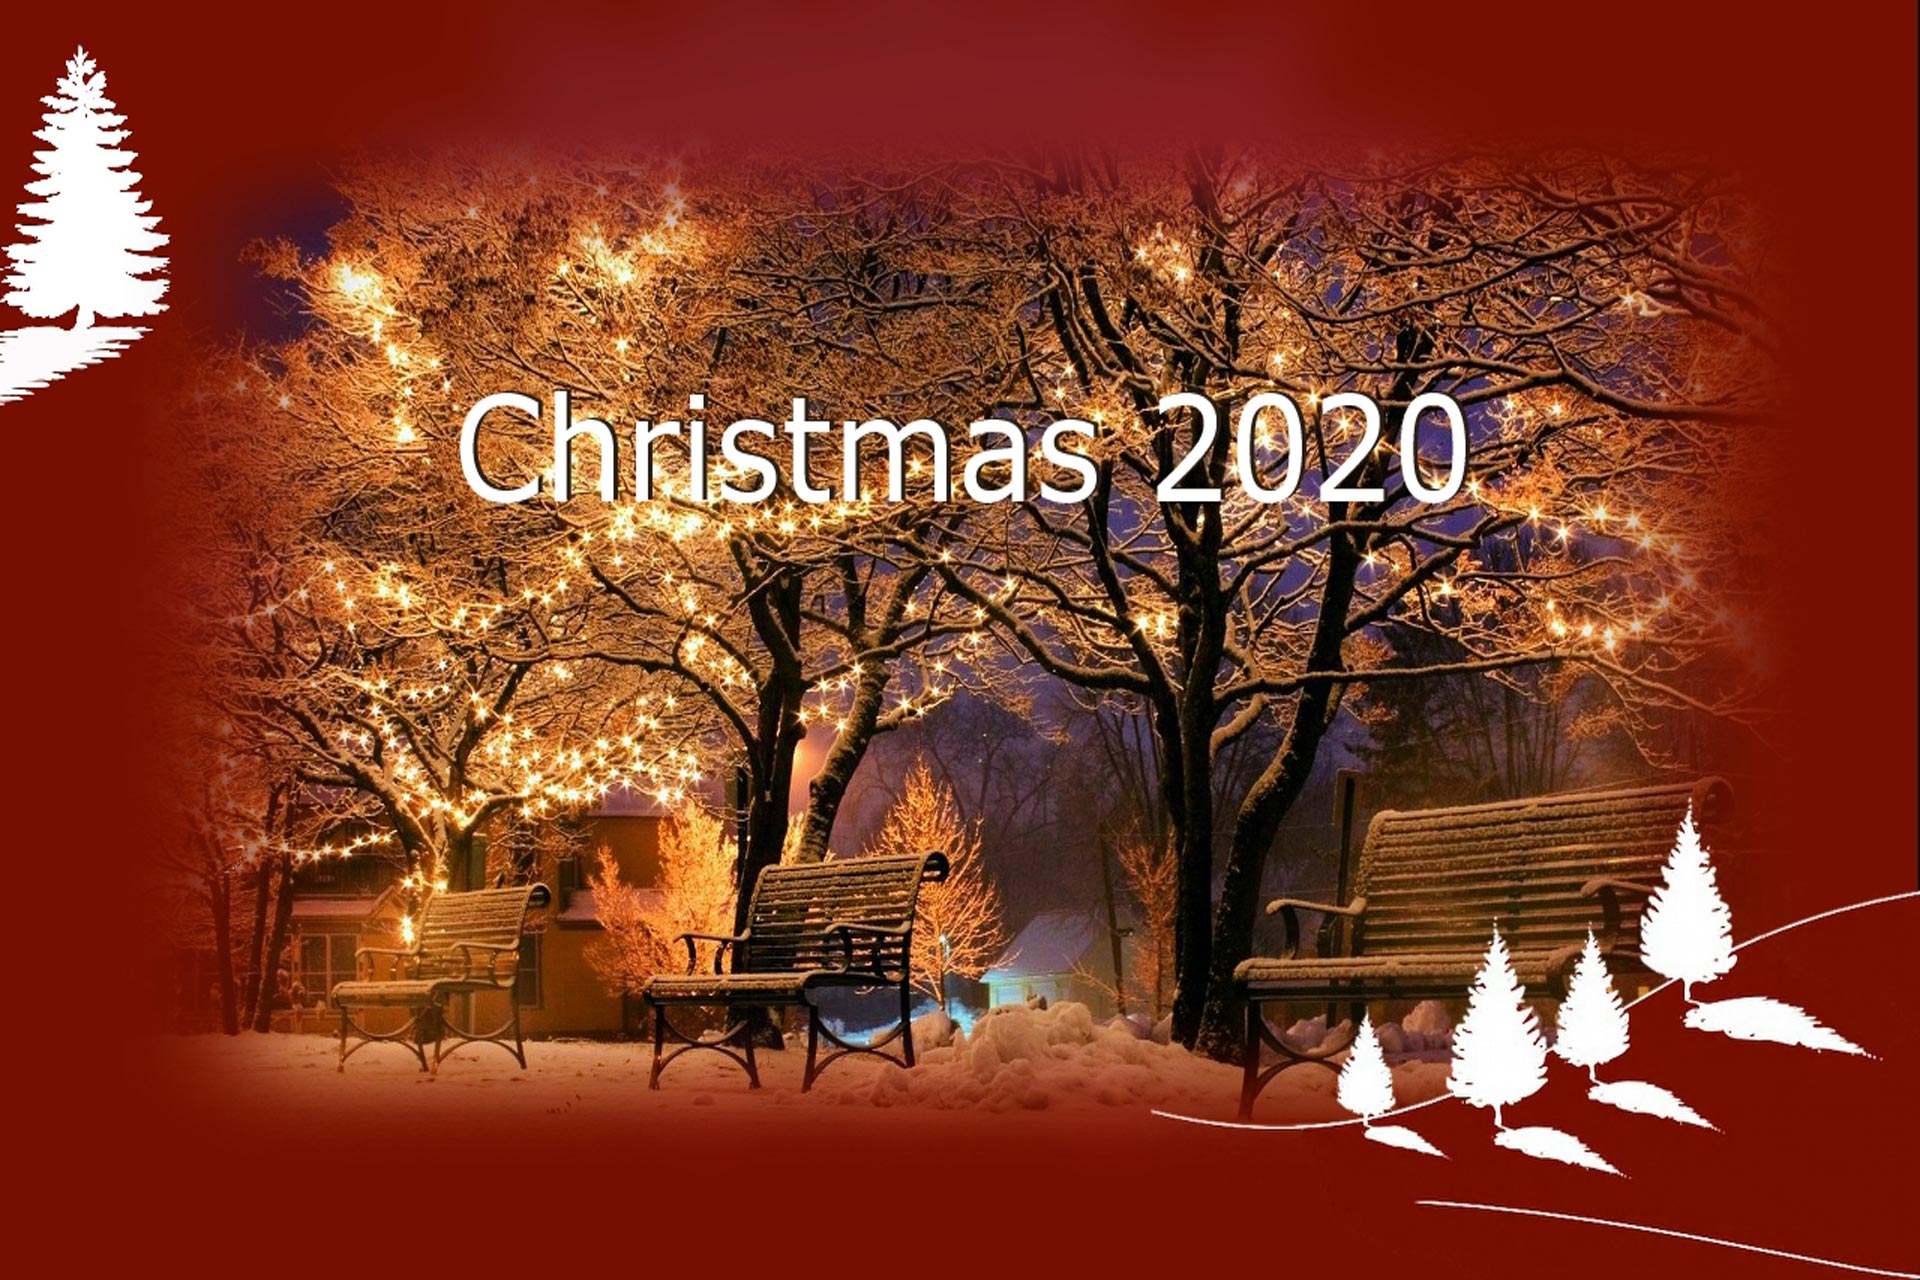 Christmas 2020: different and inspiring